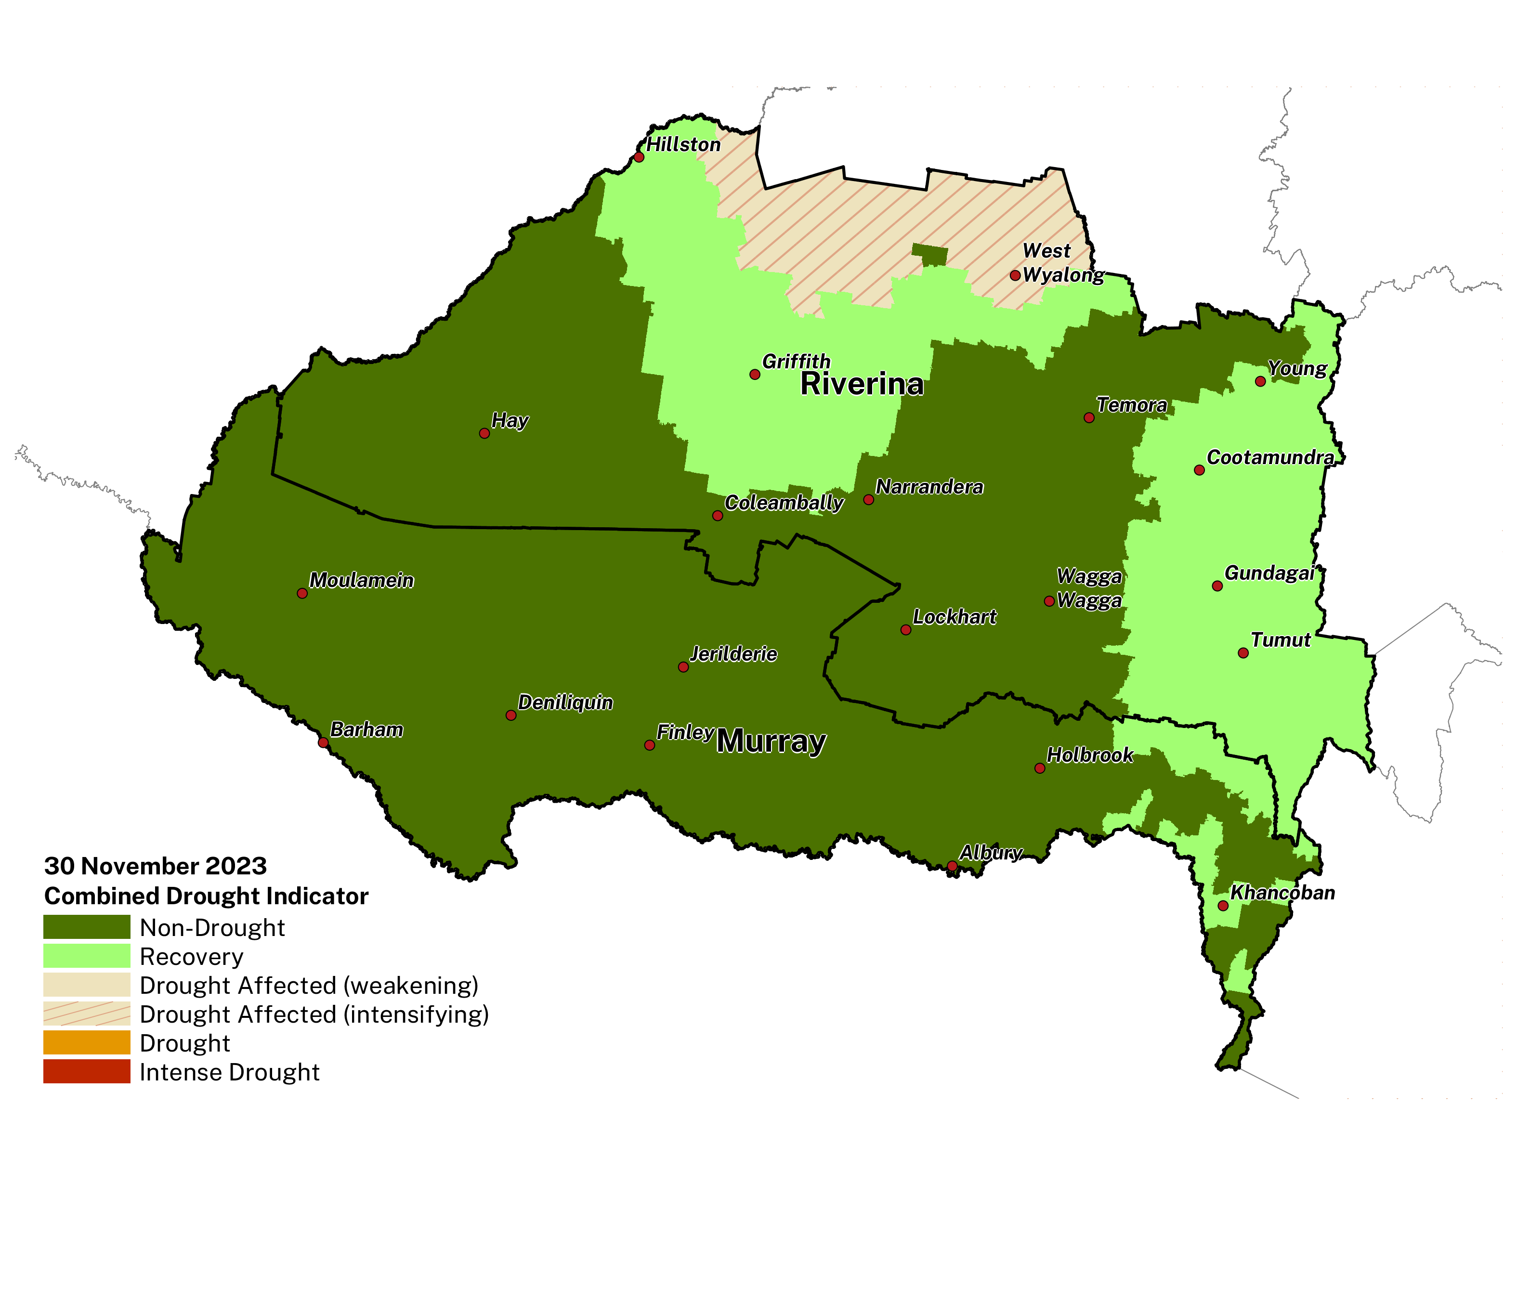 Figure 18. Combined Drought Indicator for the Murray and Riverina regions